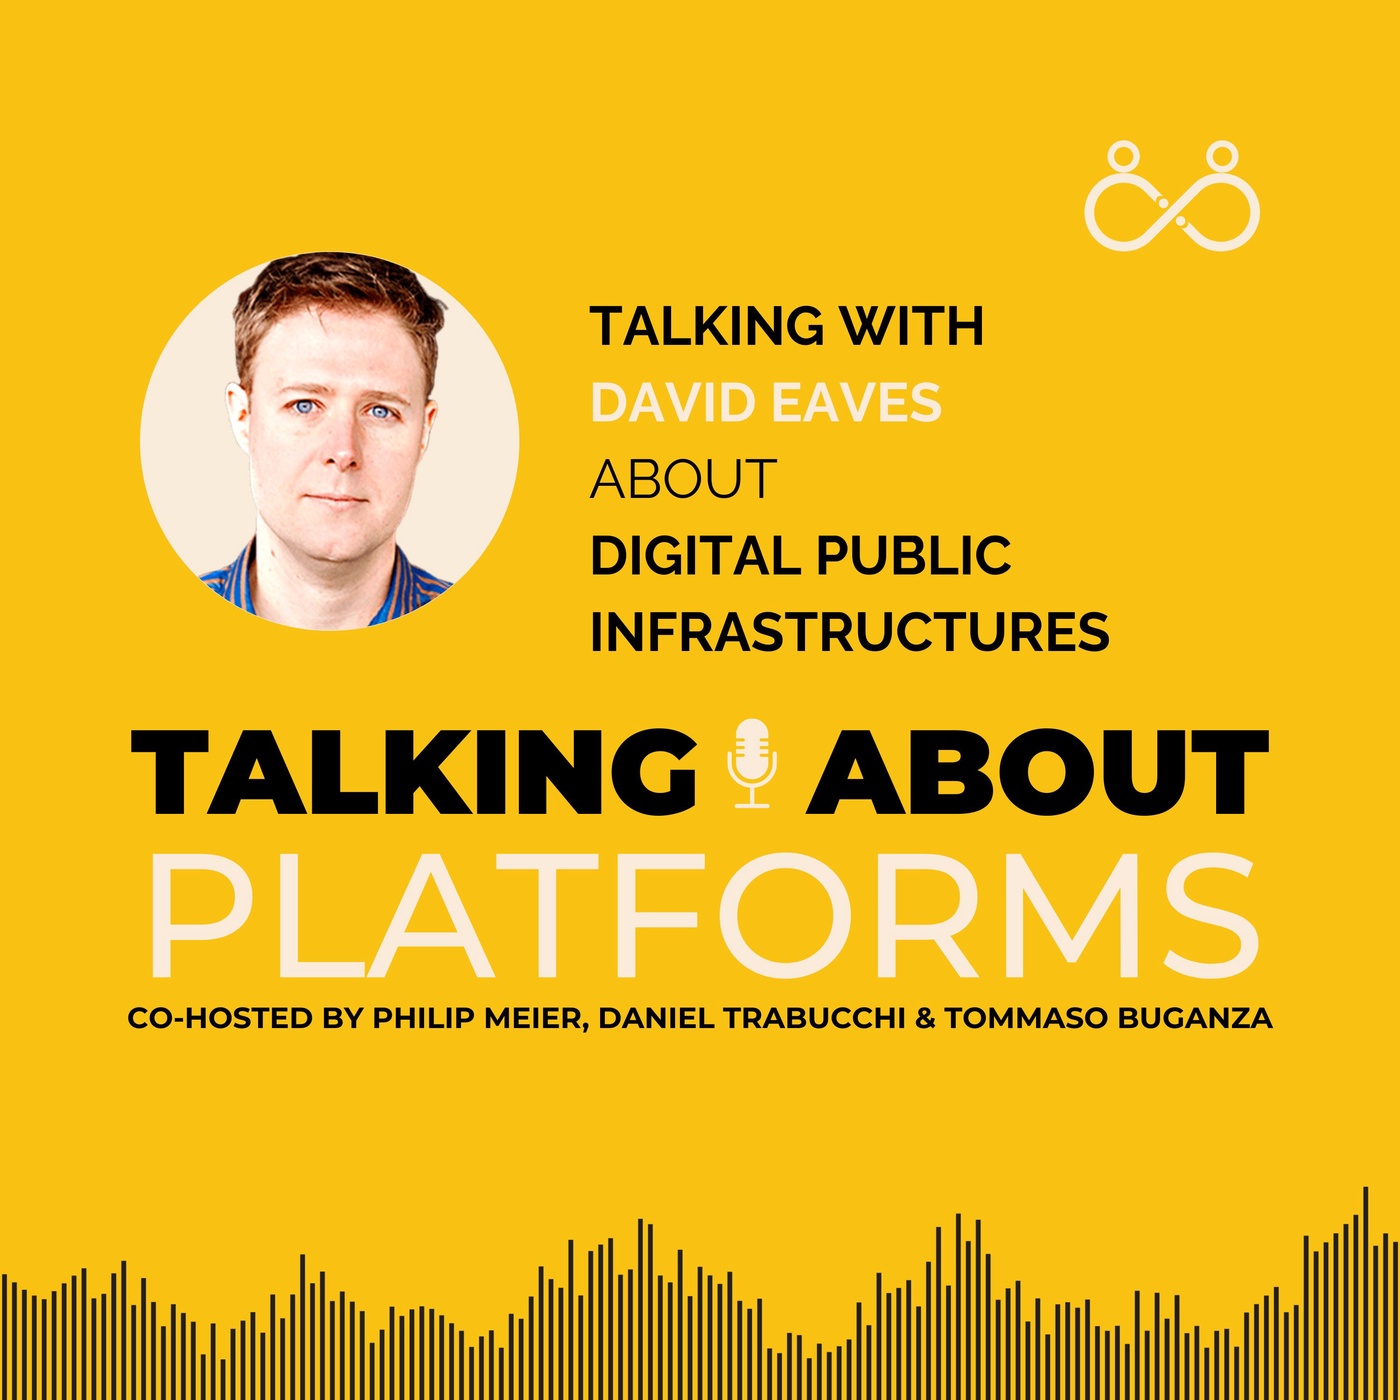 Digital public infrastructures with David Eaves